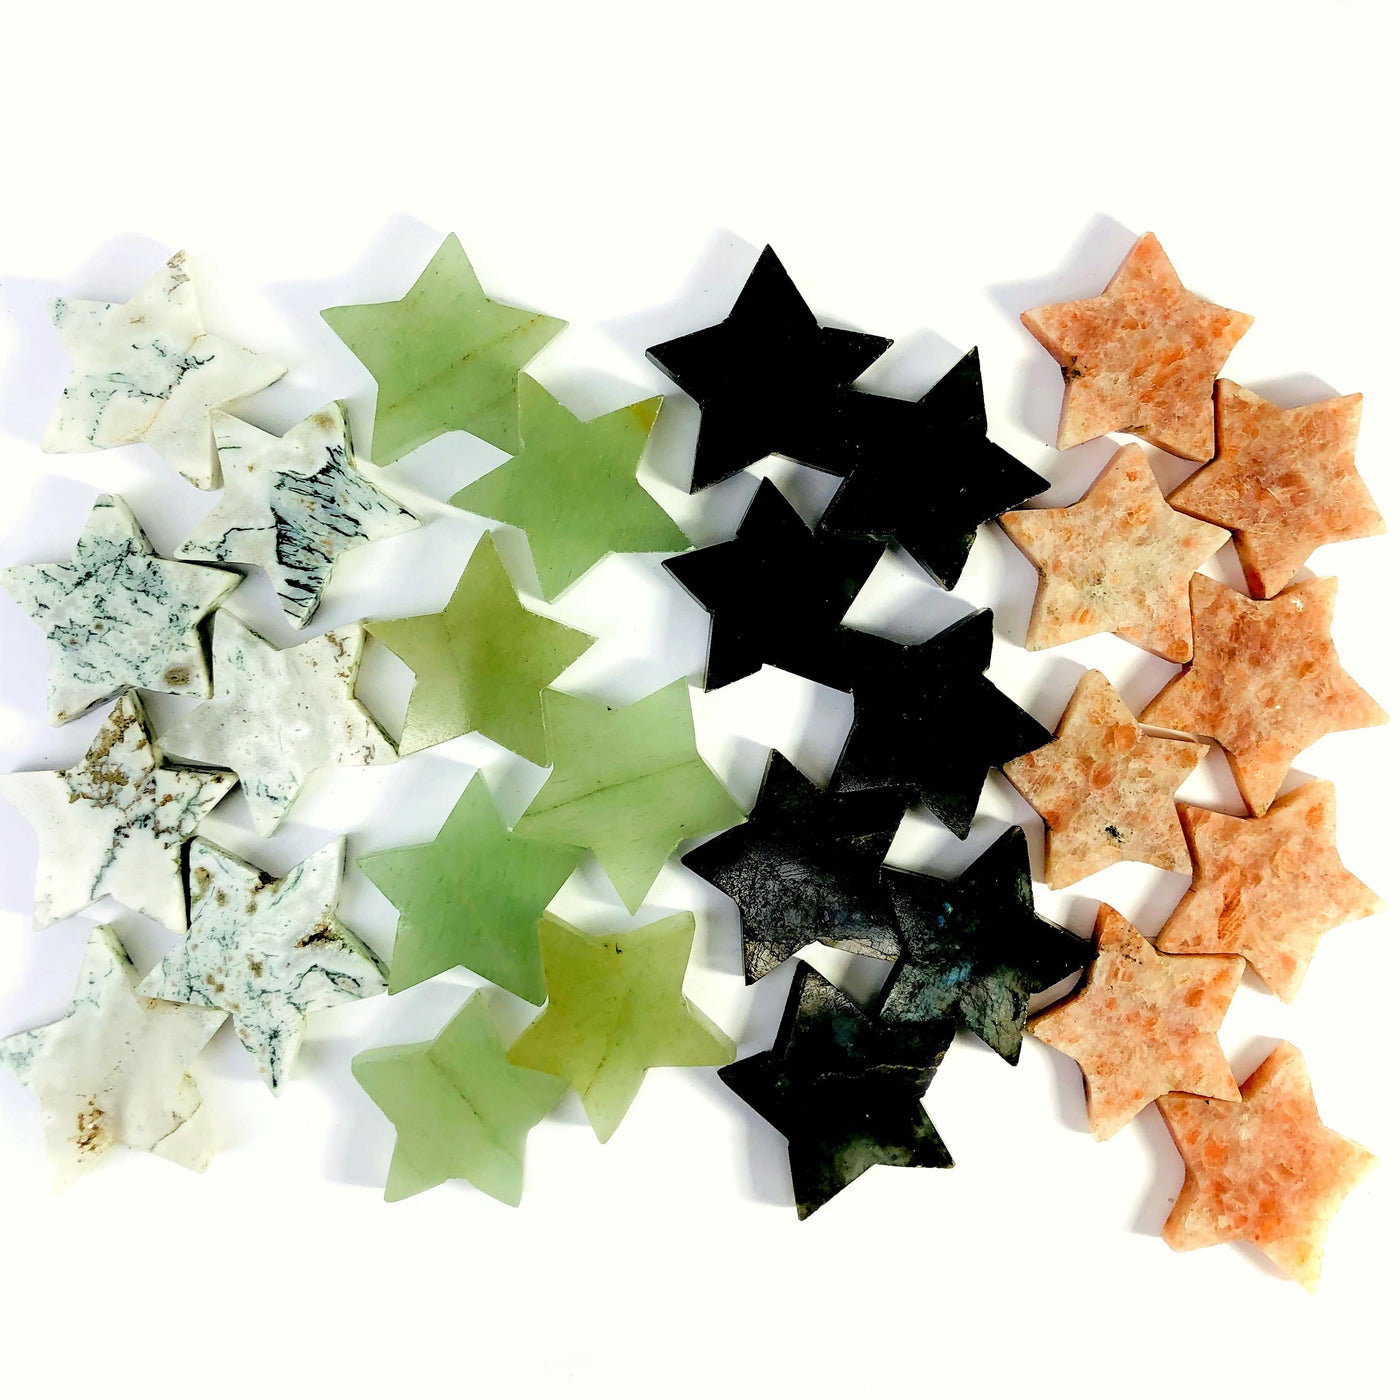 Gemstone Star Shaped Slices  - 4 DIFFERENT COLORS SHOWN